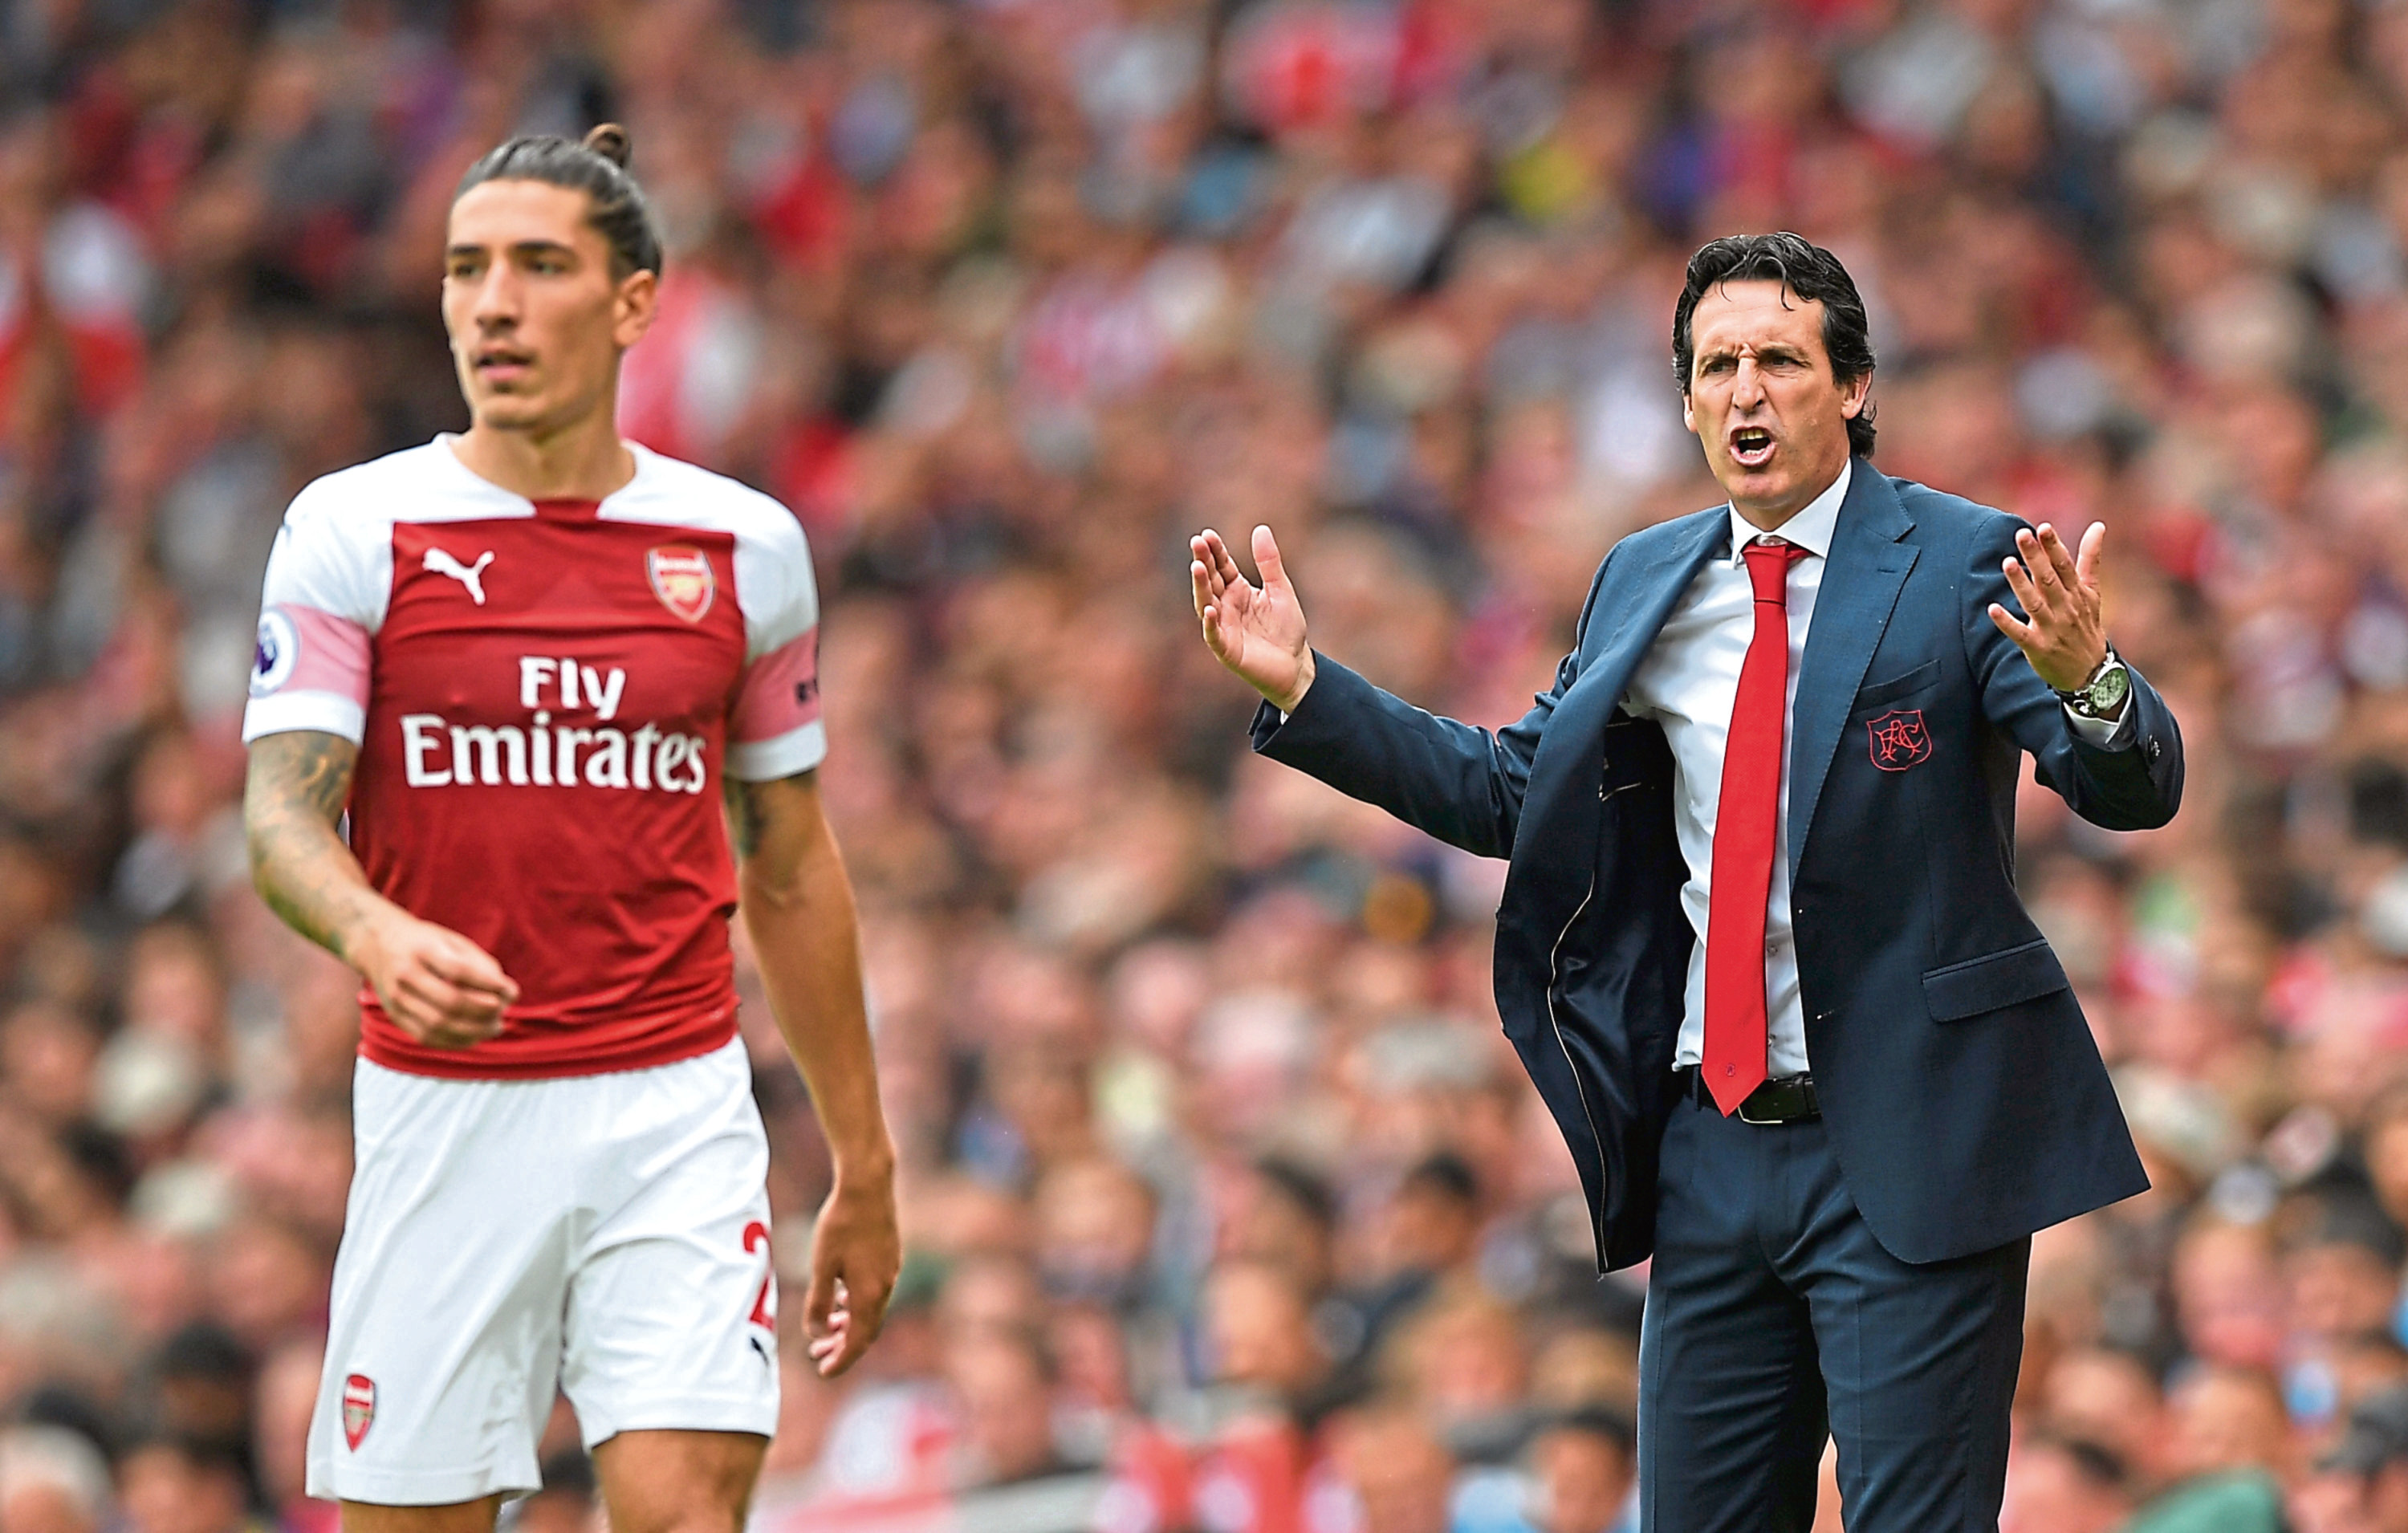 Unai Emery has turned fortunes round at the Emirates this season